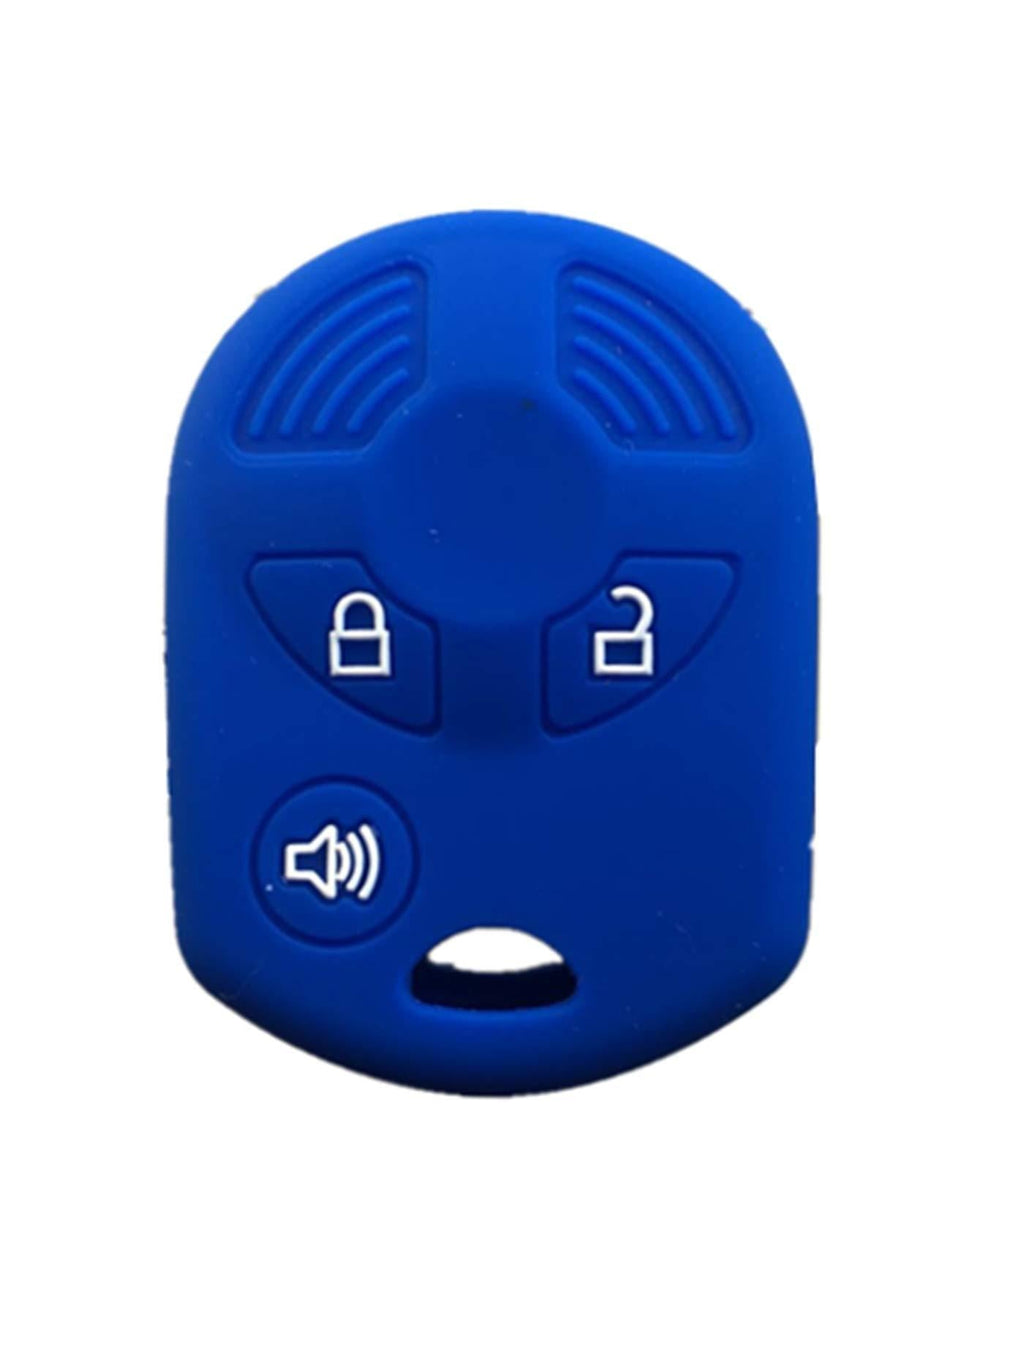  [AUSTRALIA] - Rpkey Silicone Keyless Entry Remote Control Key Fob Cover Case protector For Ford Escape Transit Connect OUCD6000022 164-R8007 850K-D6000022